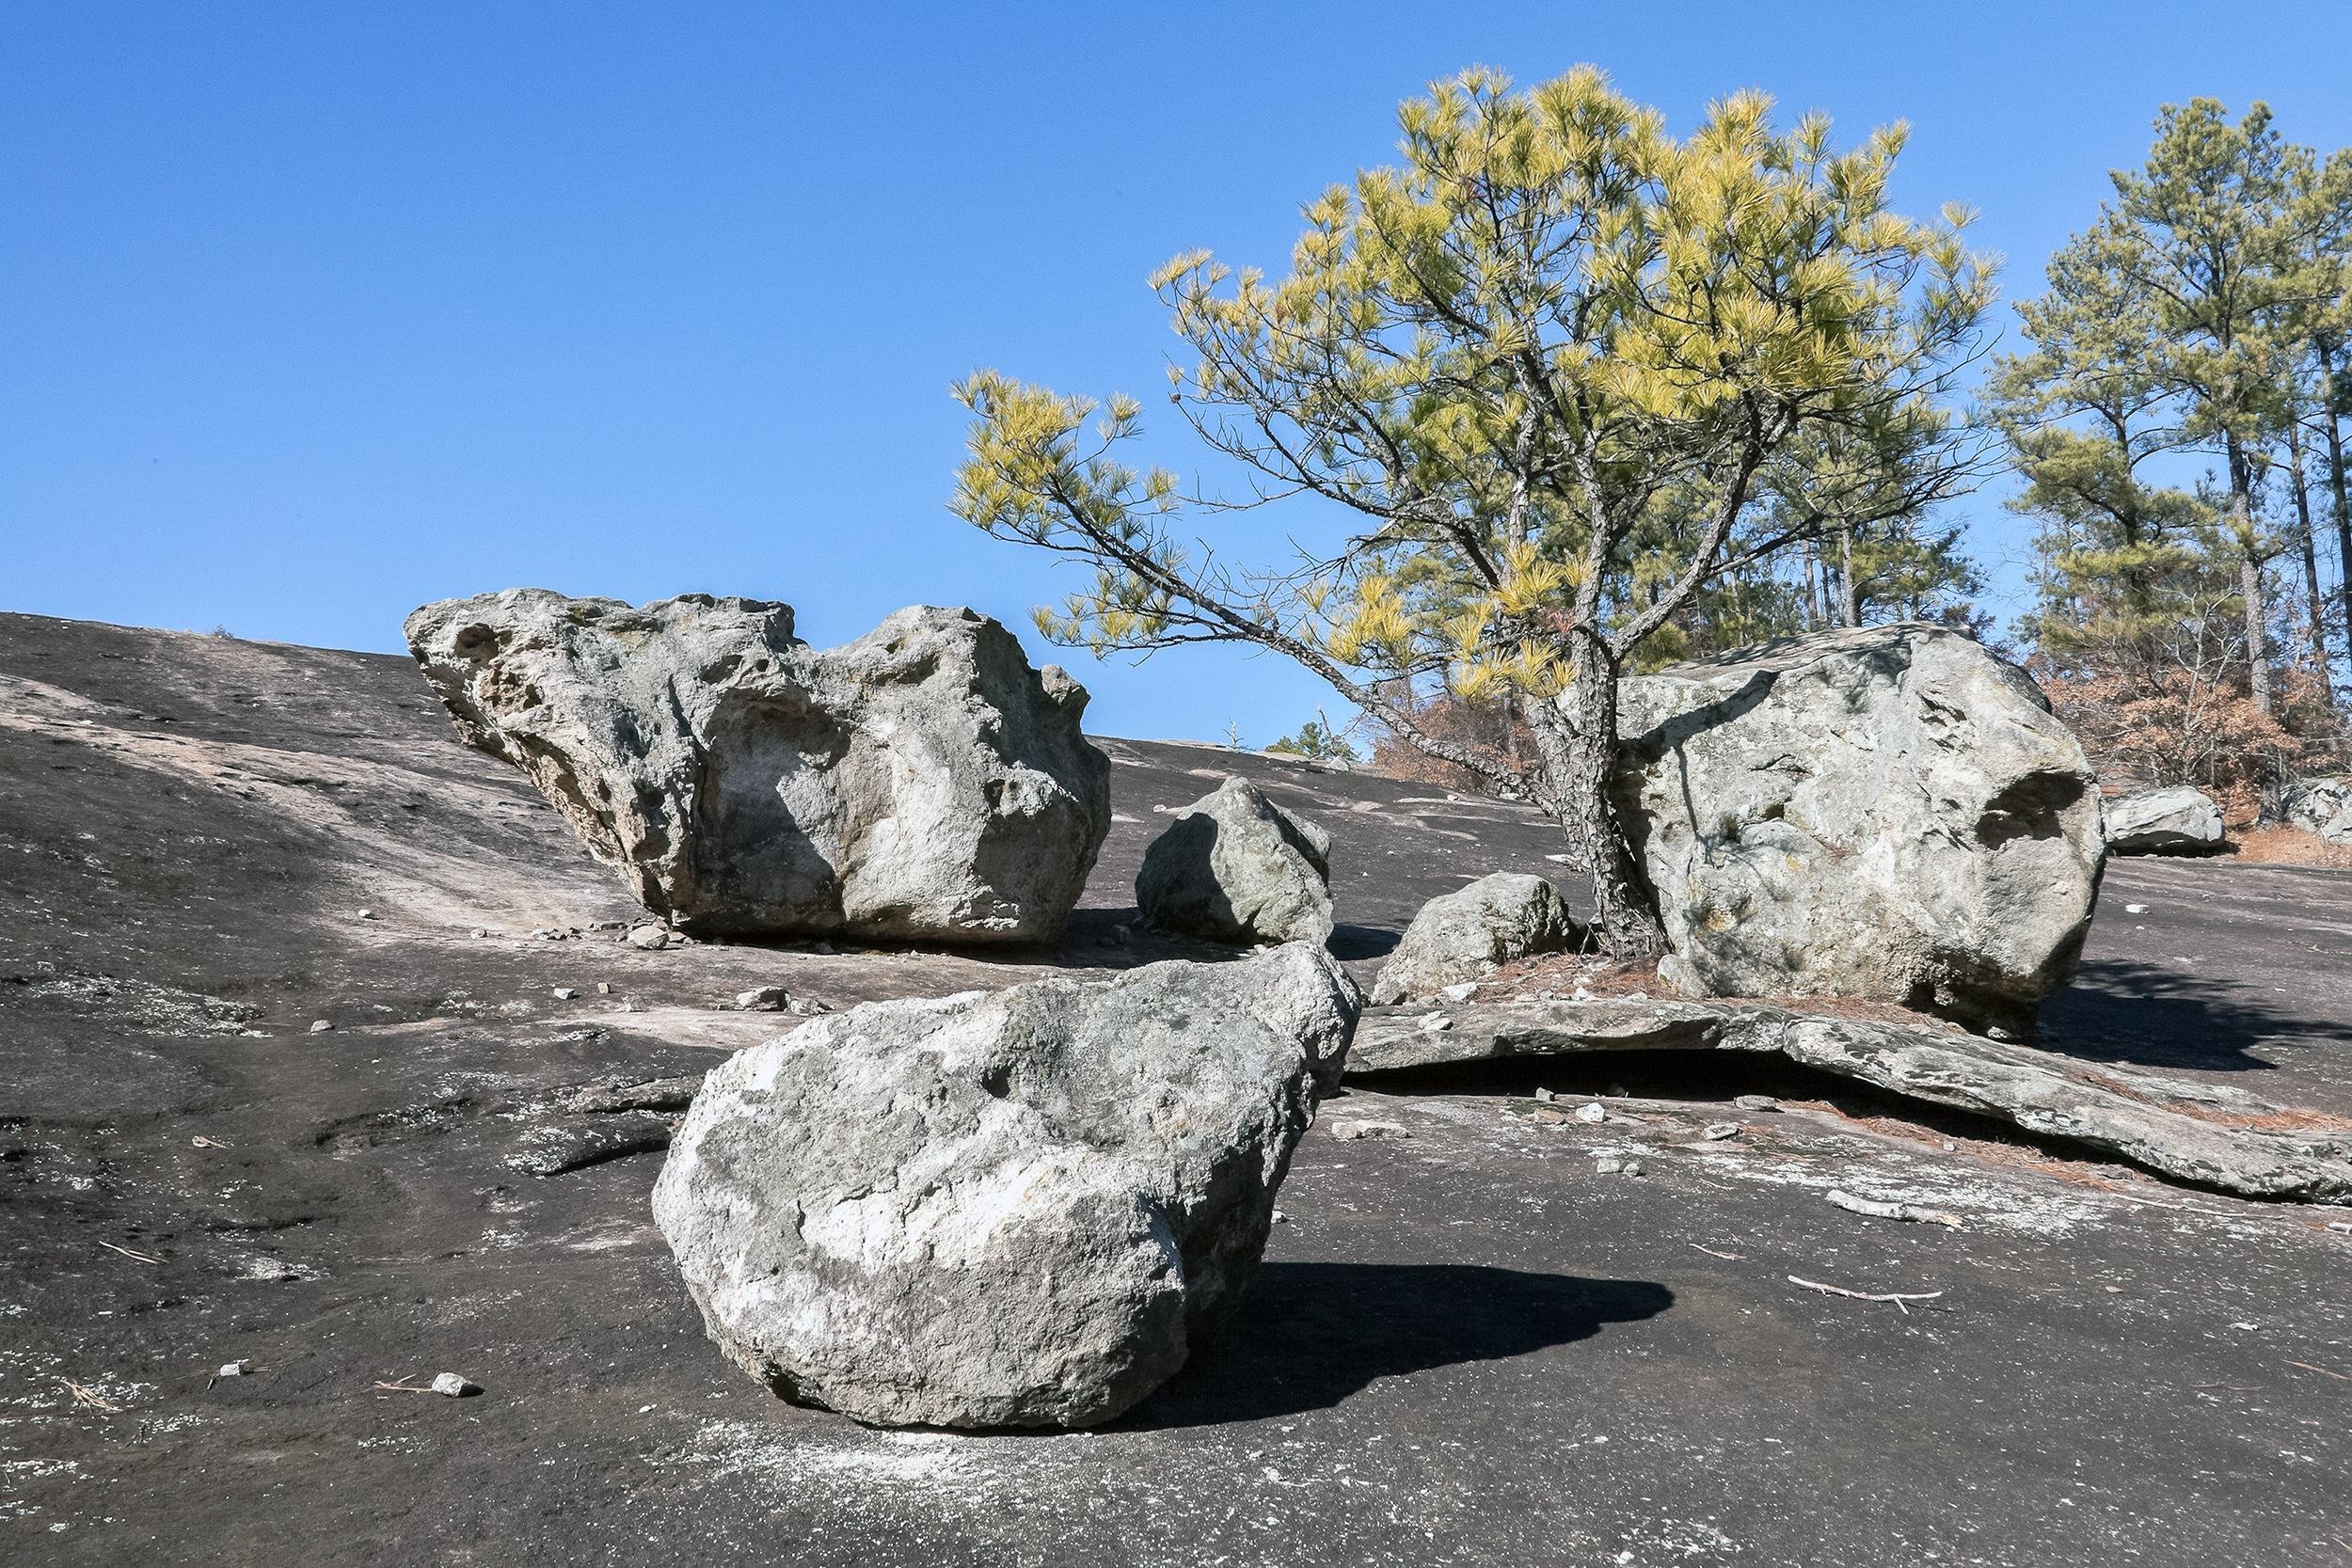 <p>Residents of Georgia and tourists staying in Atlanta can visit Arabia Mountain in Lithonia, just east of the city. The gorgeous landscape is tough to beat for hiking and photos, no matter the time of day.</p>